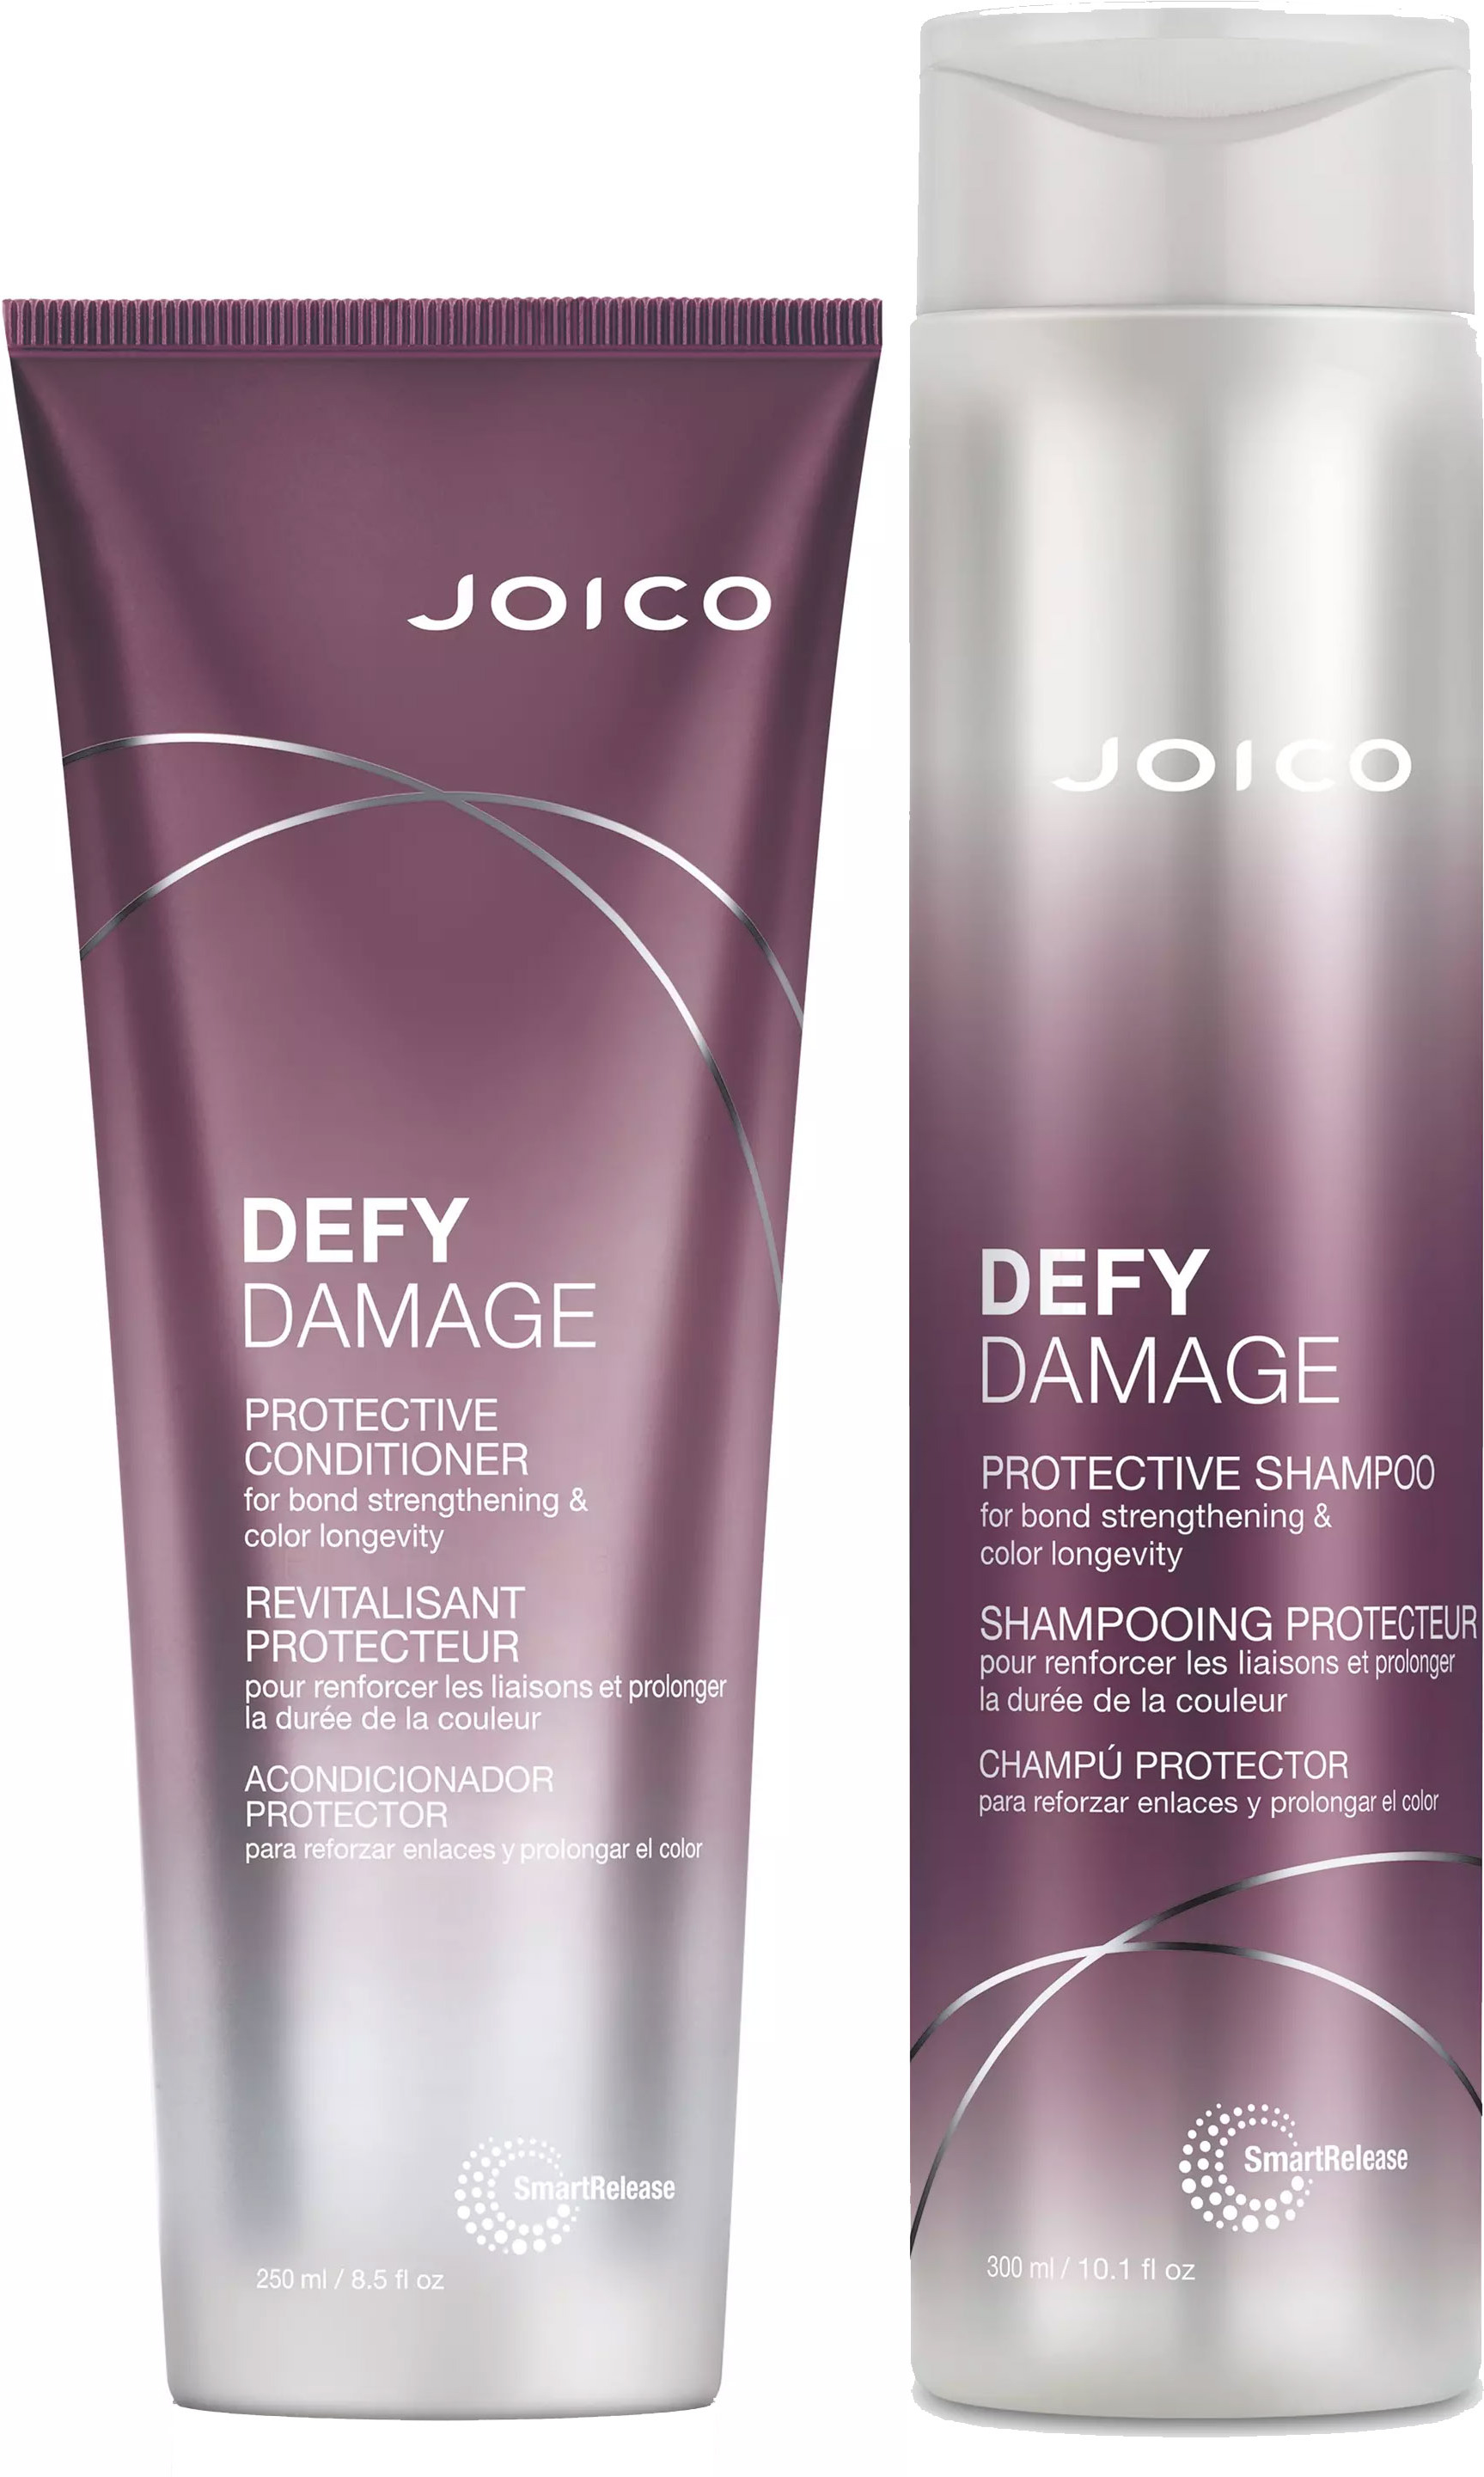 Joico Defy Damage Package